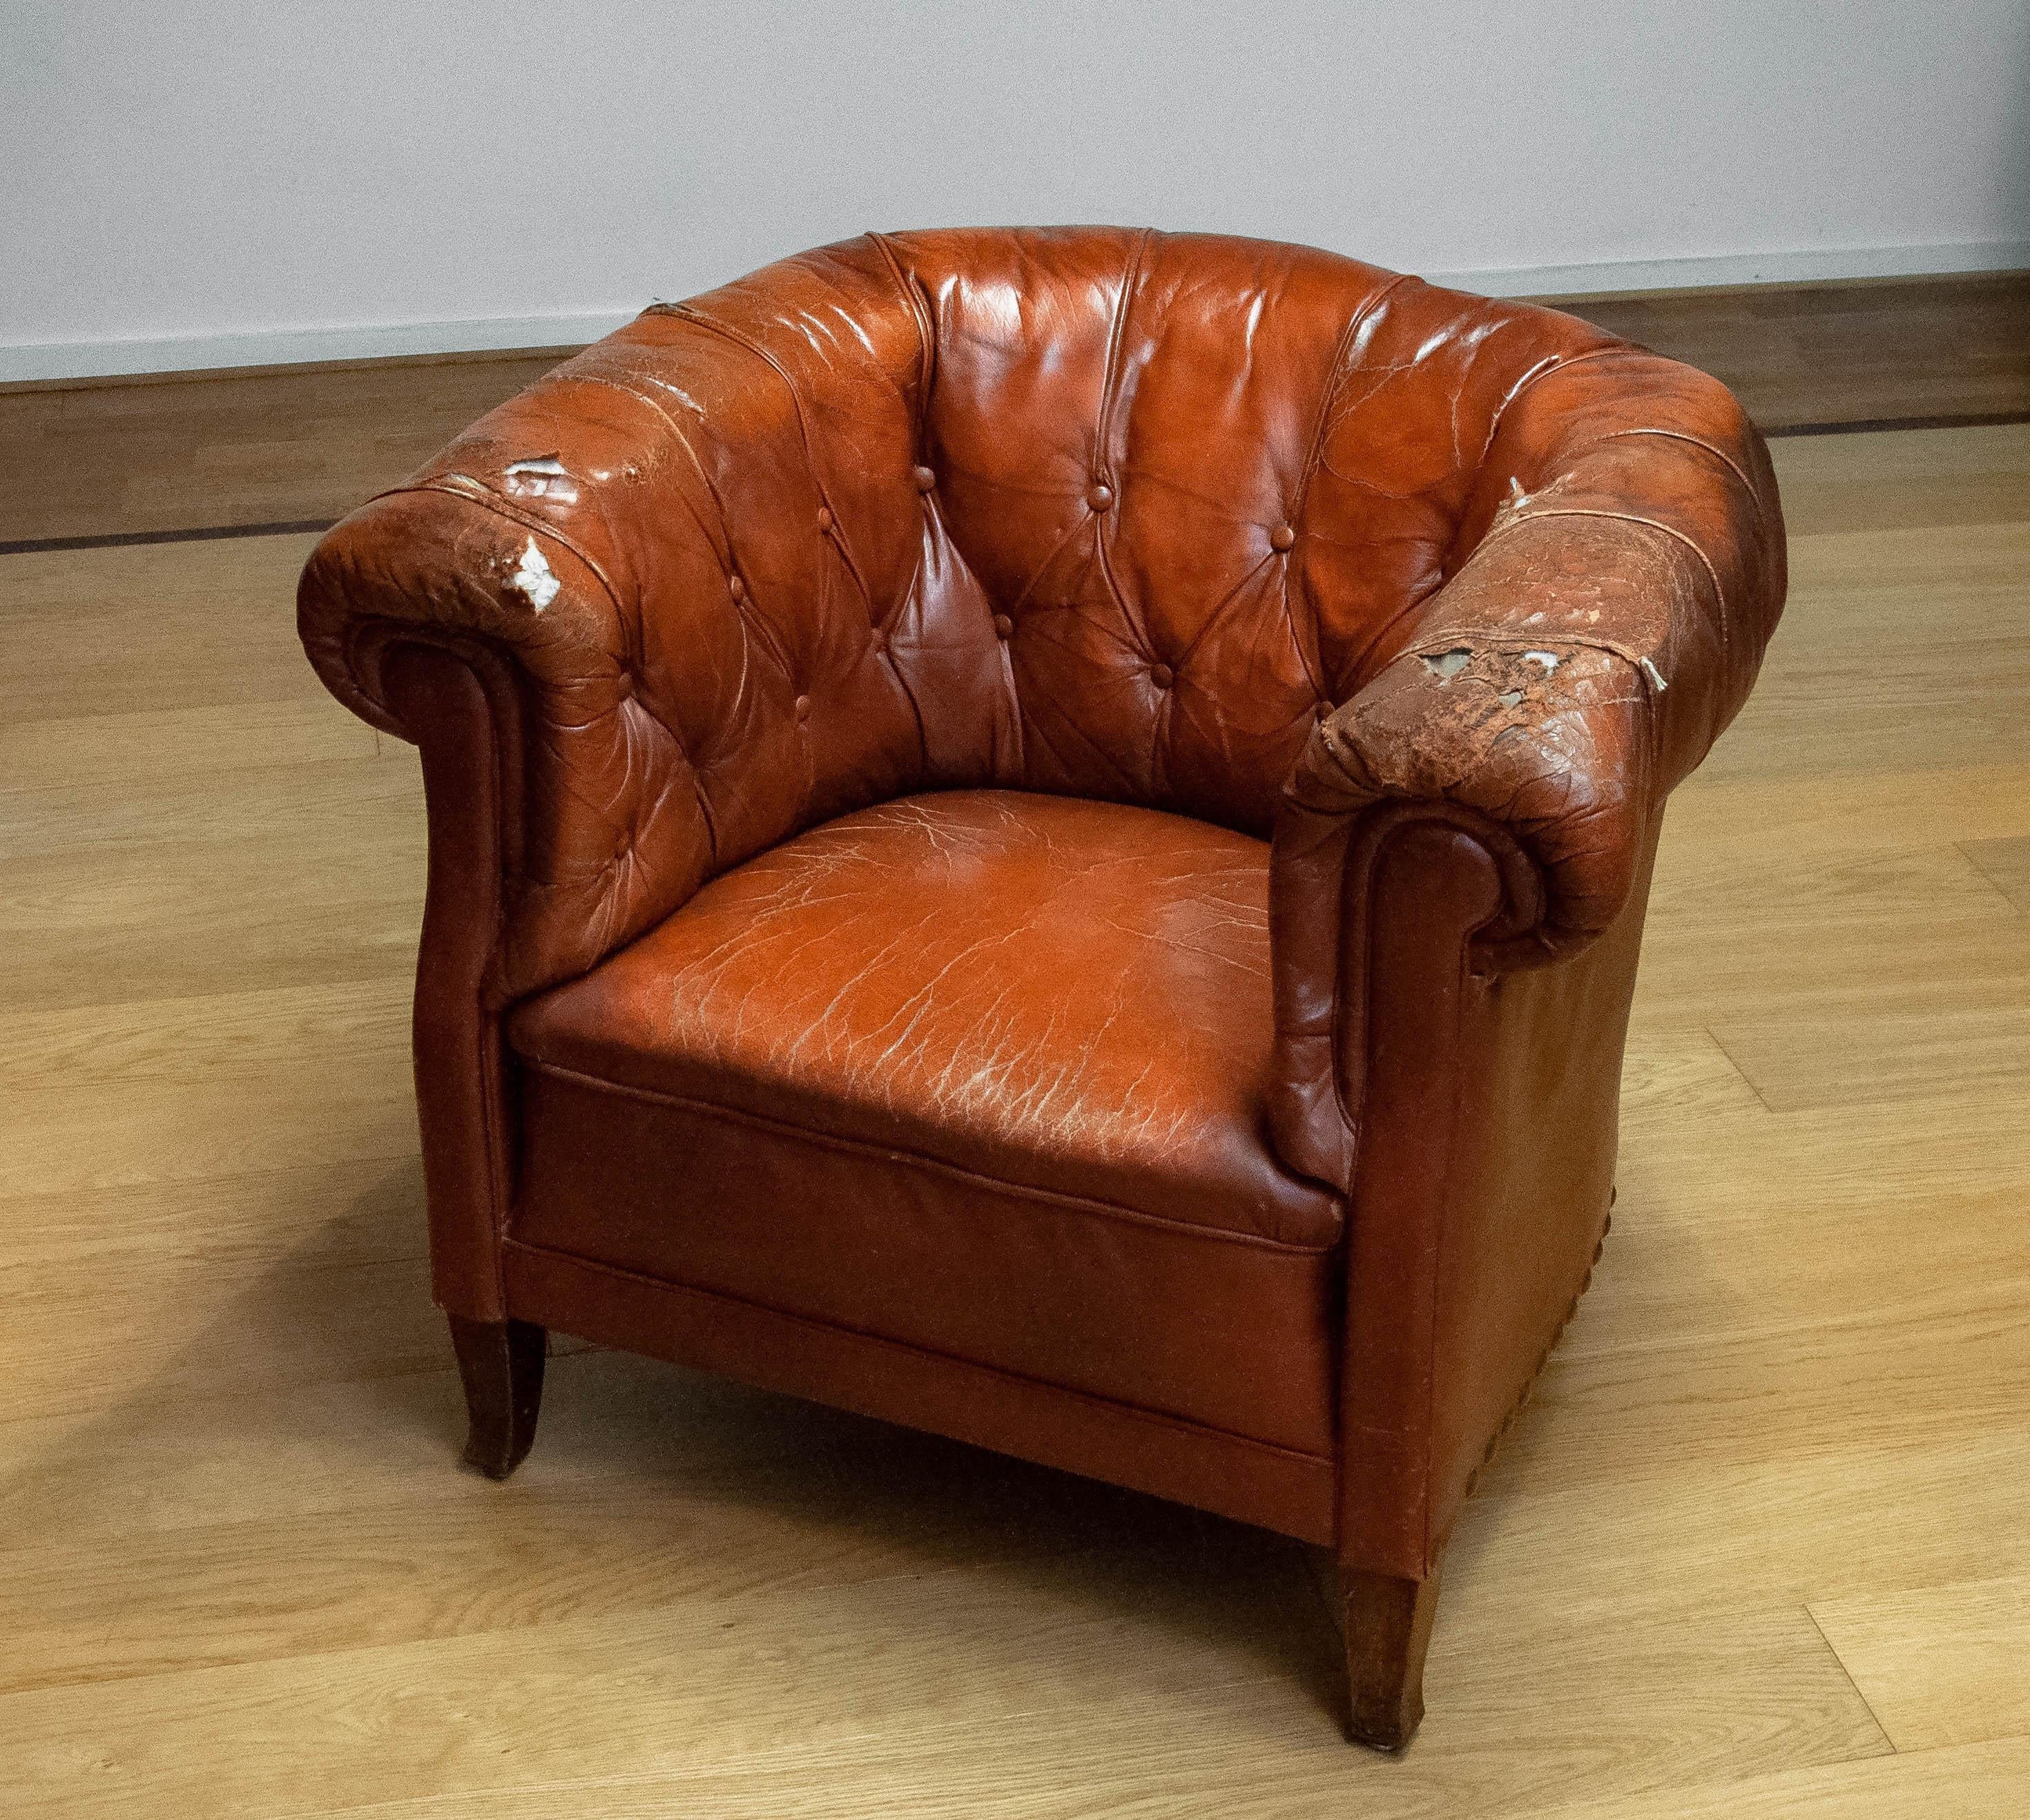 1940s Swedish Tufted Club Chair 'Chesterfield Model' In Tan Brown Worn Leather In Fair Condition In Silvolde, Gelderland